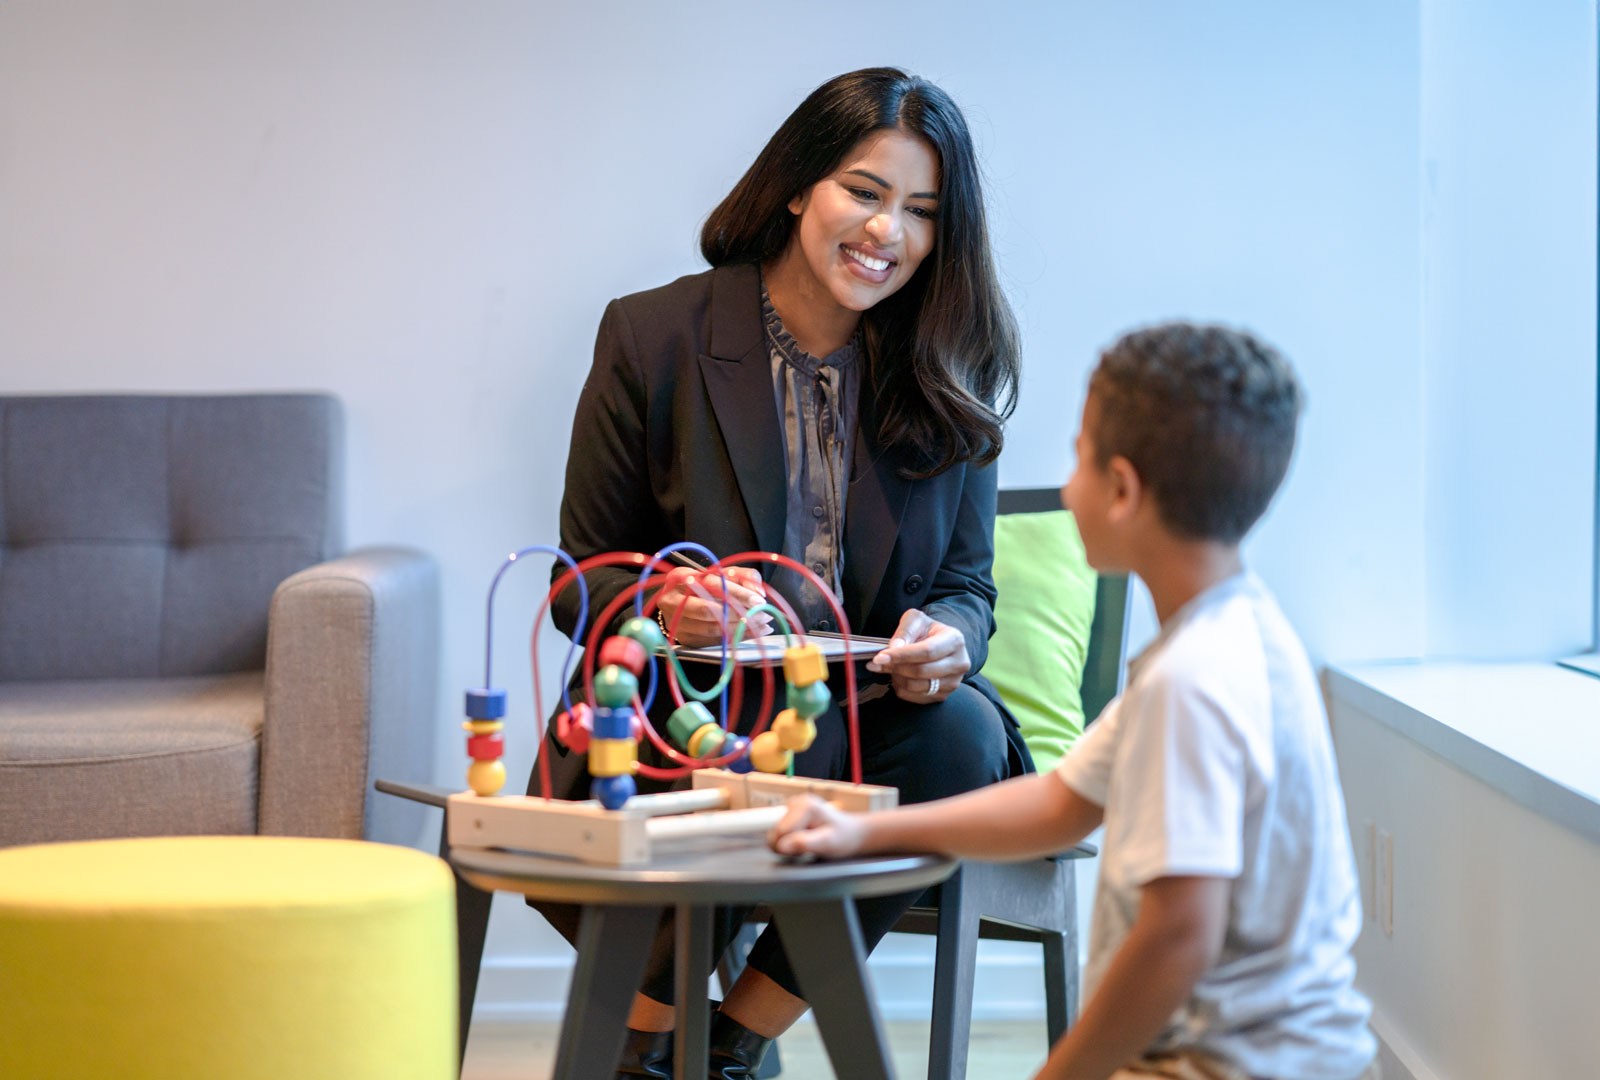 Smiling provider looking on at child seated on ground playing with toy